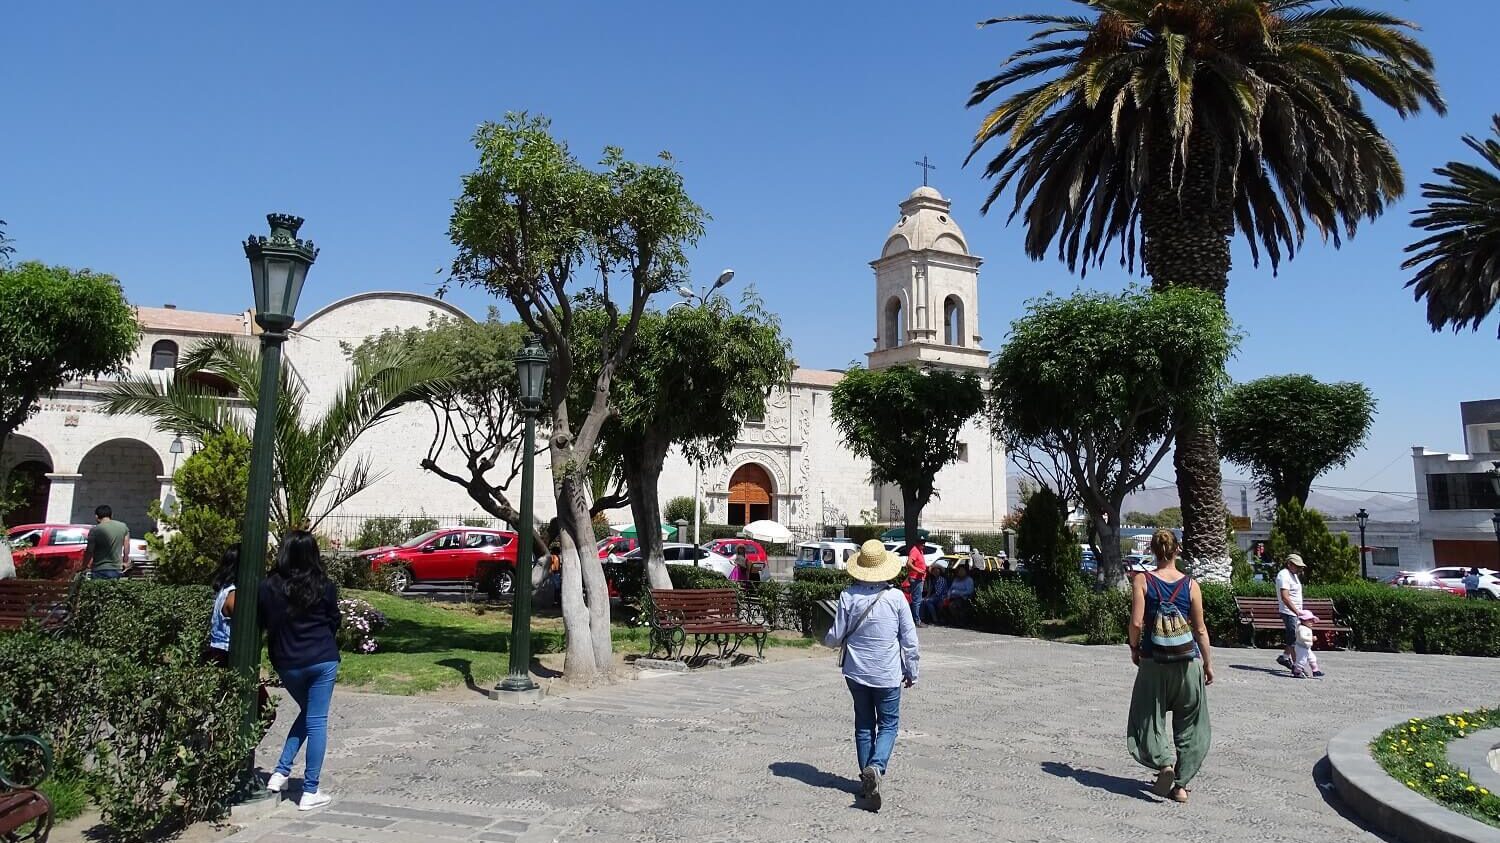 The church and square of Characato, an traditional area located south of Arequipa